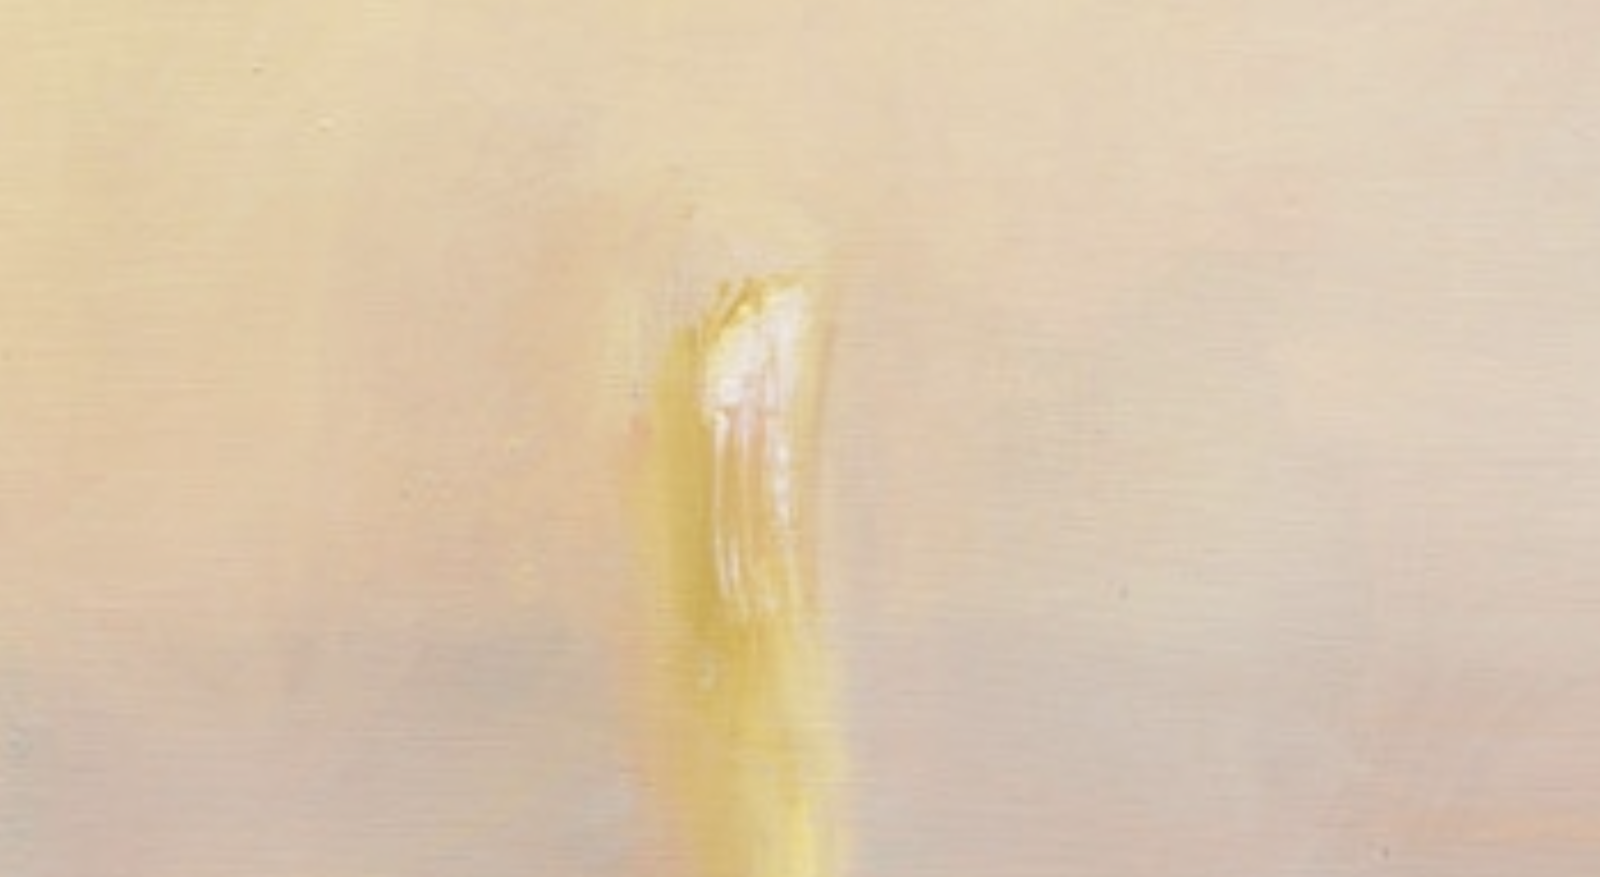 Detail of pale yellow and off white painting with a lit candle bottom left